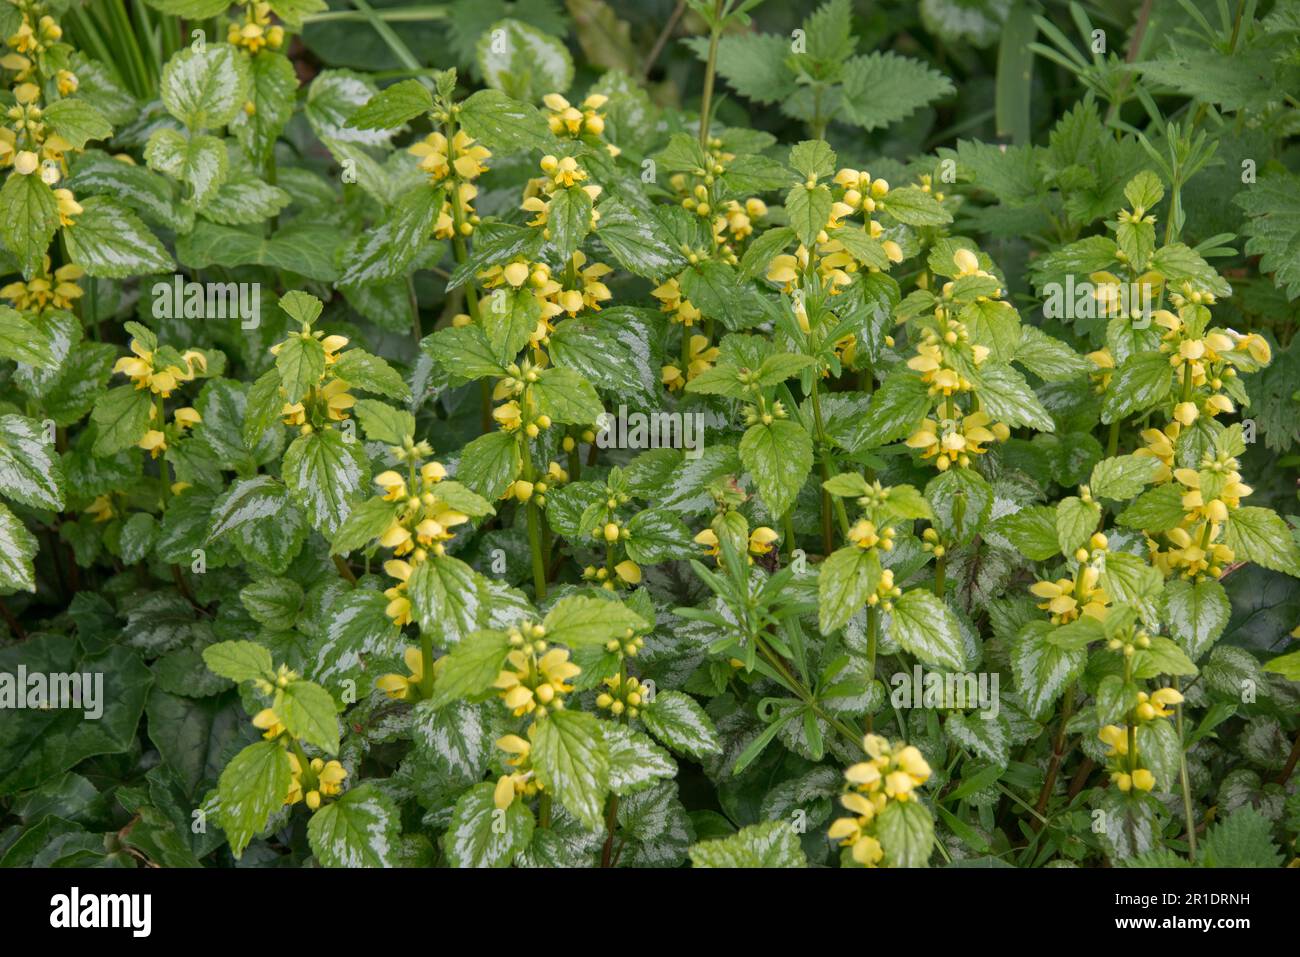 Variegated yellow archangel ( Lamium galeobdolon) in flower with silvery leaf patches, an invasive, introduced plant species common in gardens, Berksh Stock Photo